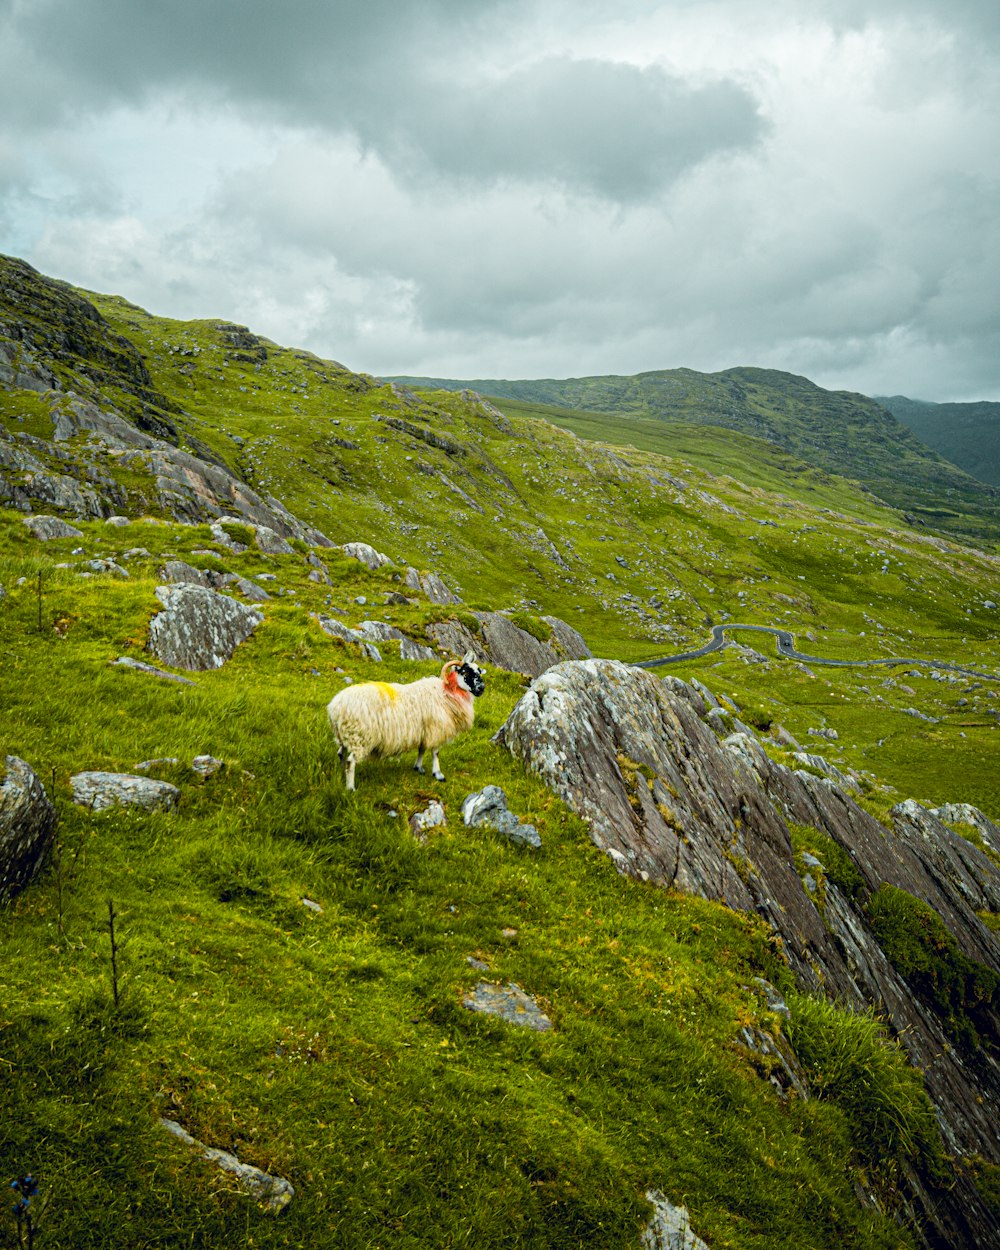 a sheep on a grassy hill